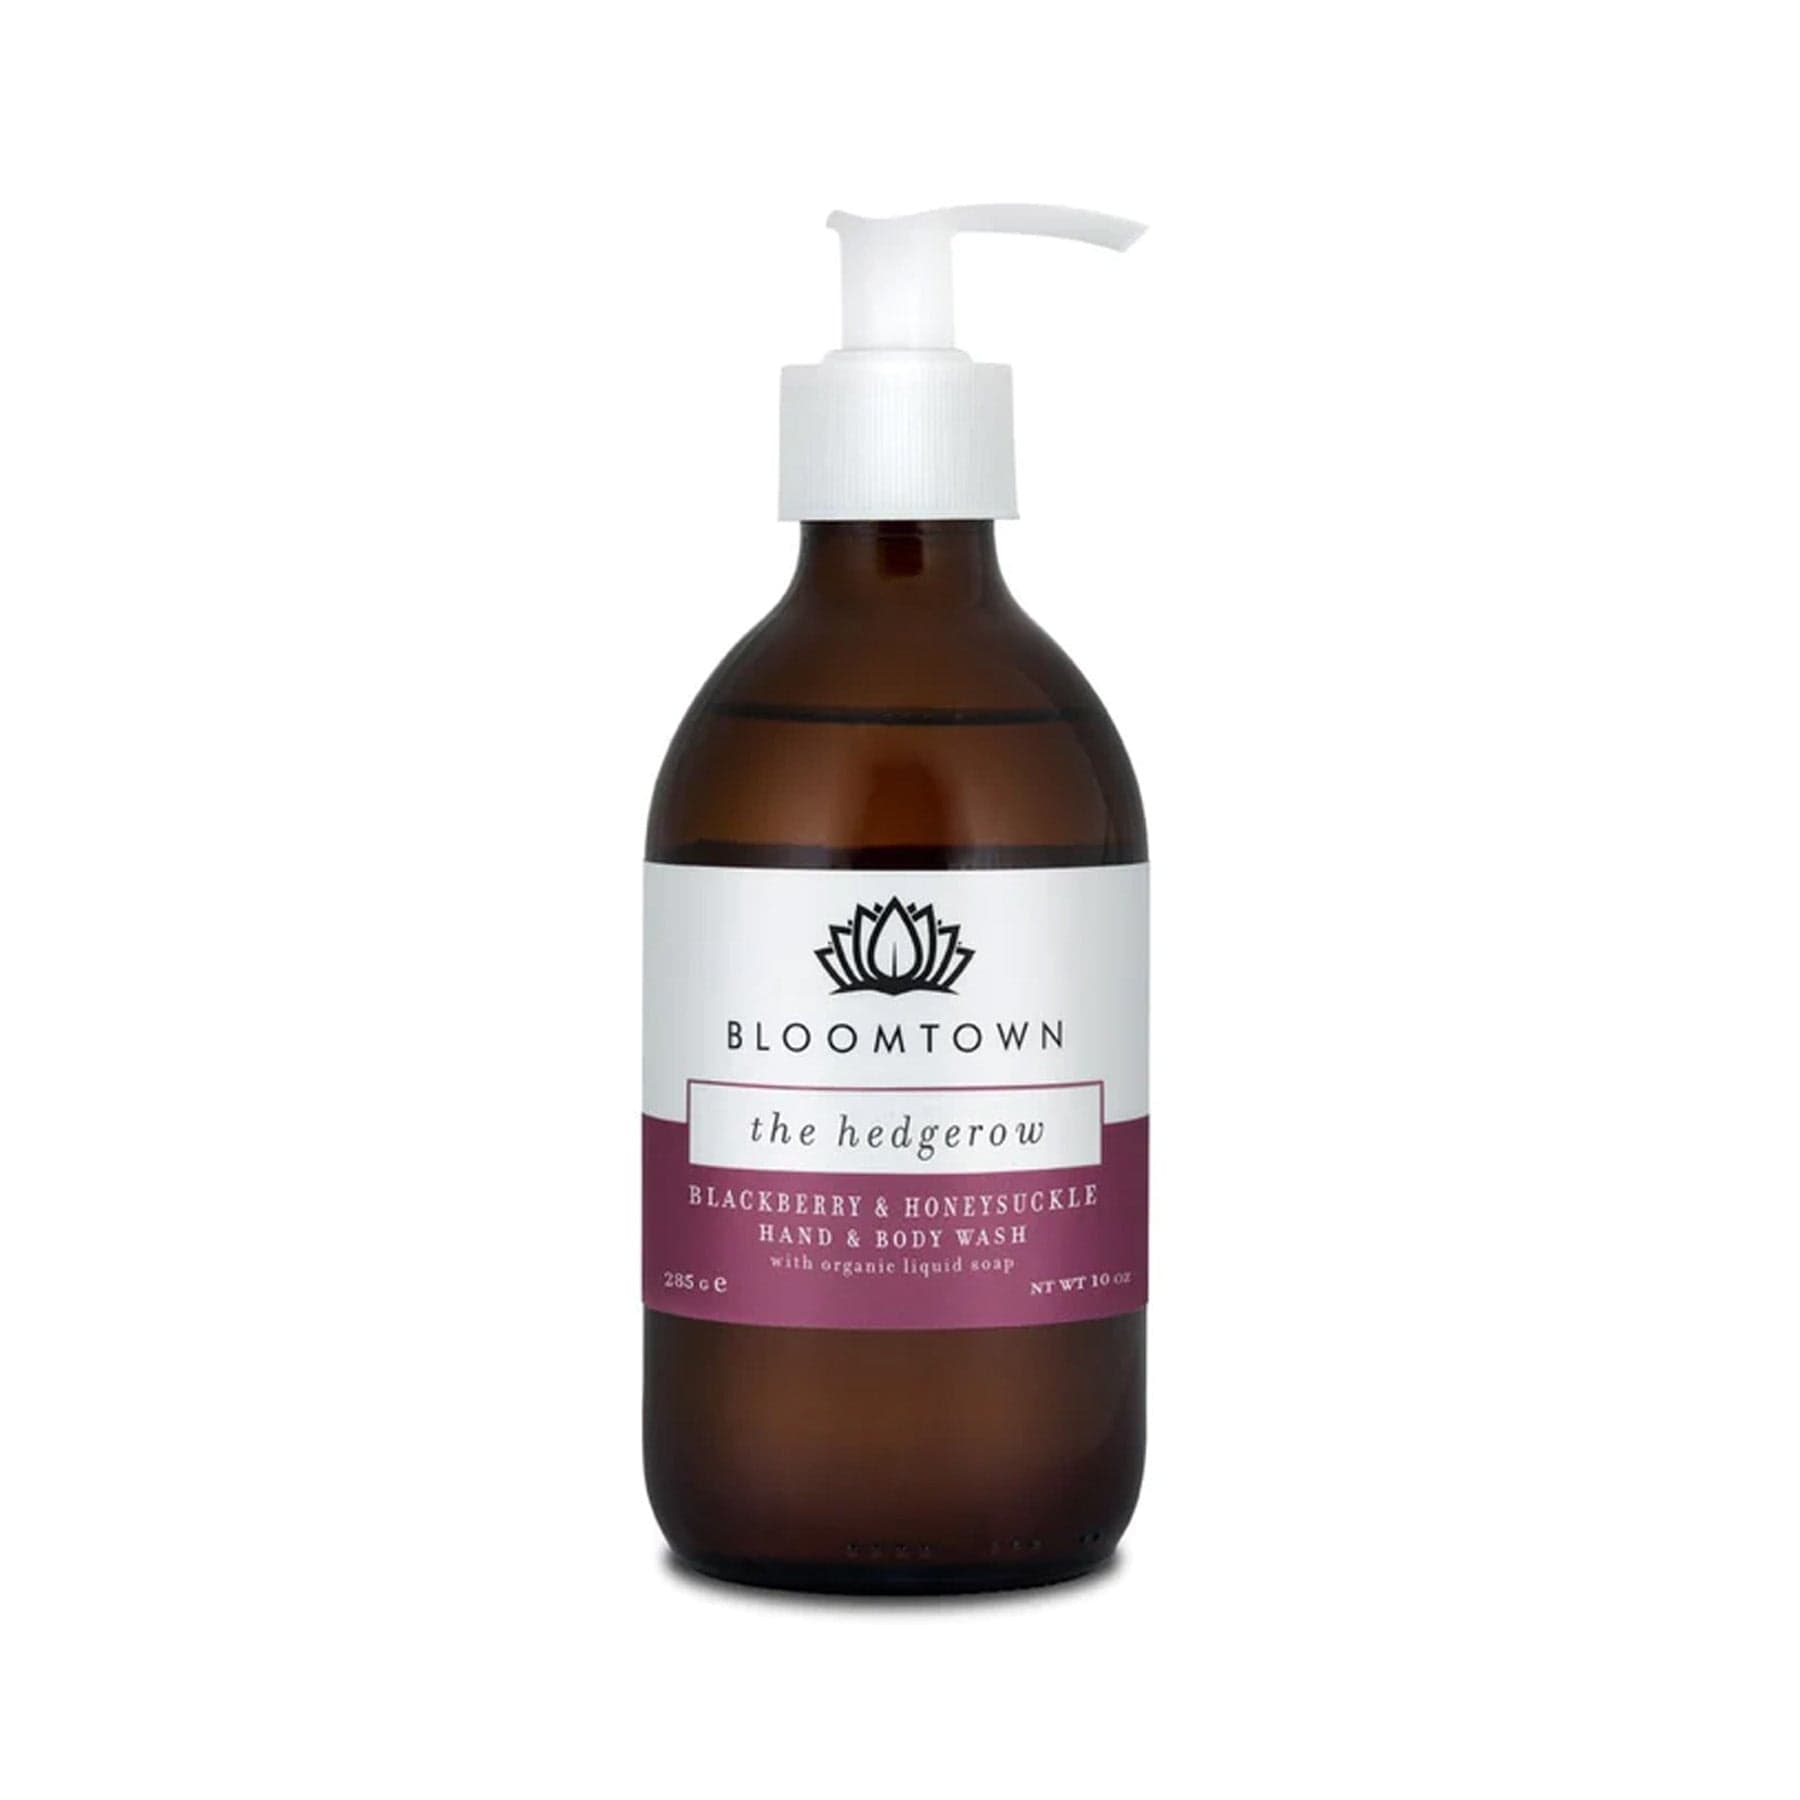 Bloomtown The Hedgerow Blackberry & Honeysuckle Hand and Body Wash with organic liquid soap in amber bottle with pump dispenser